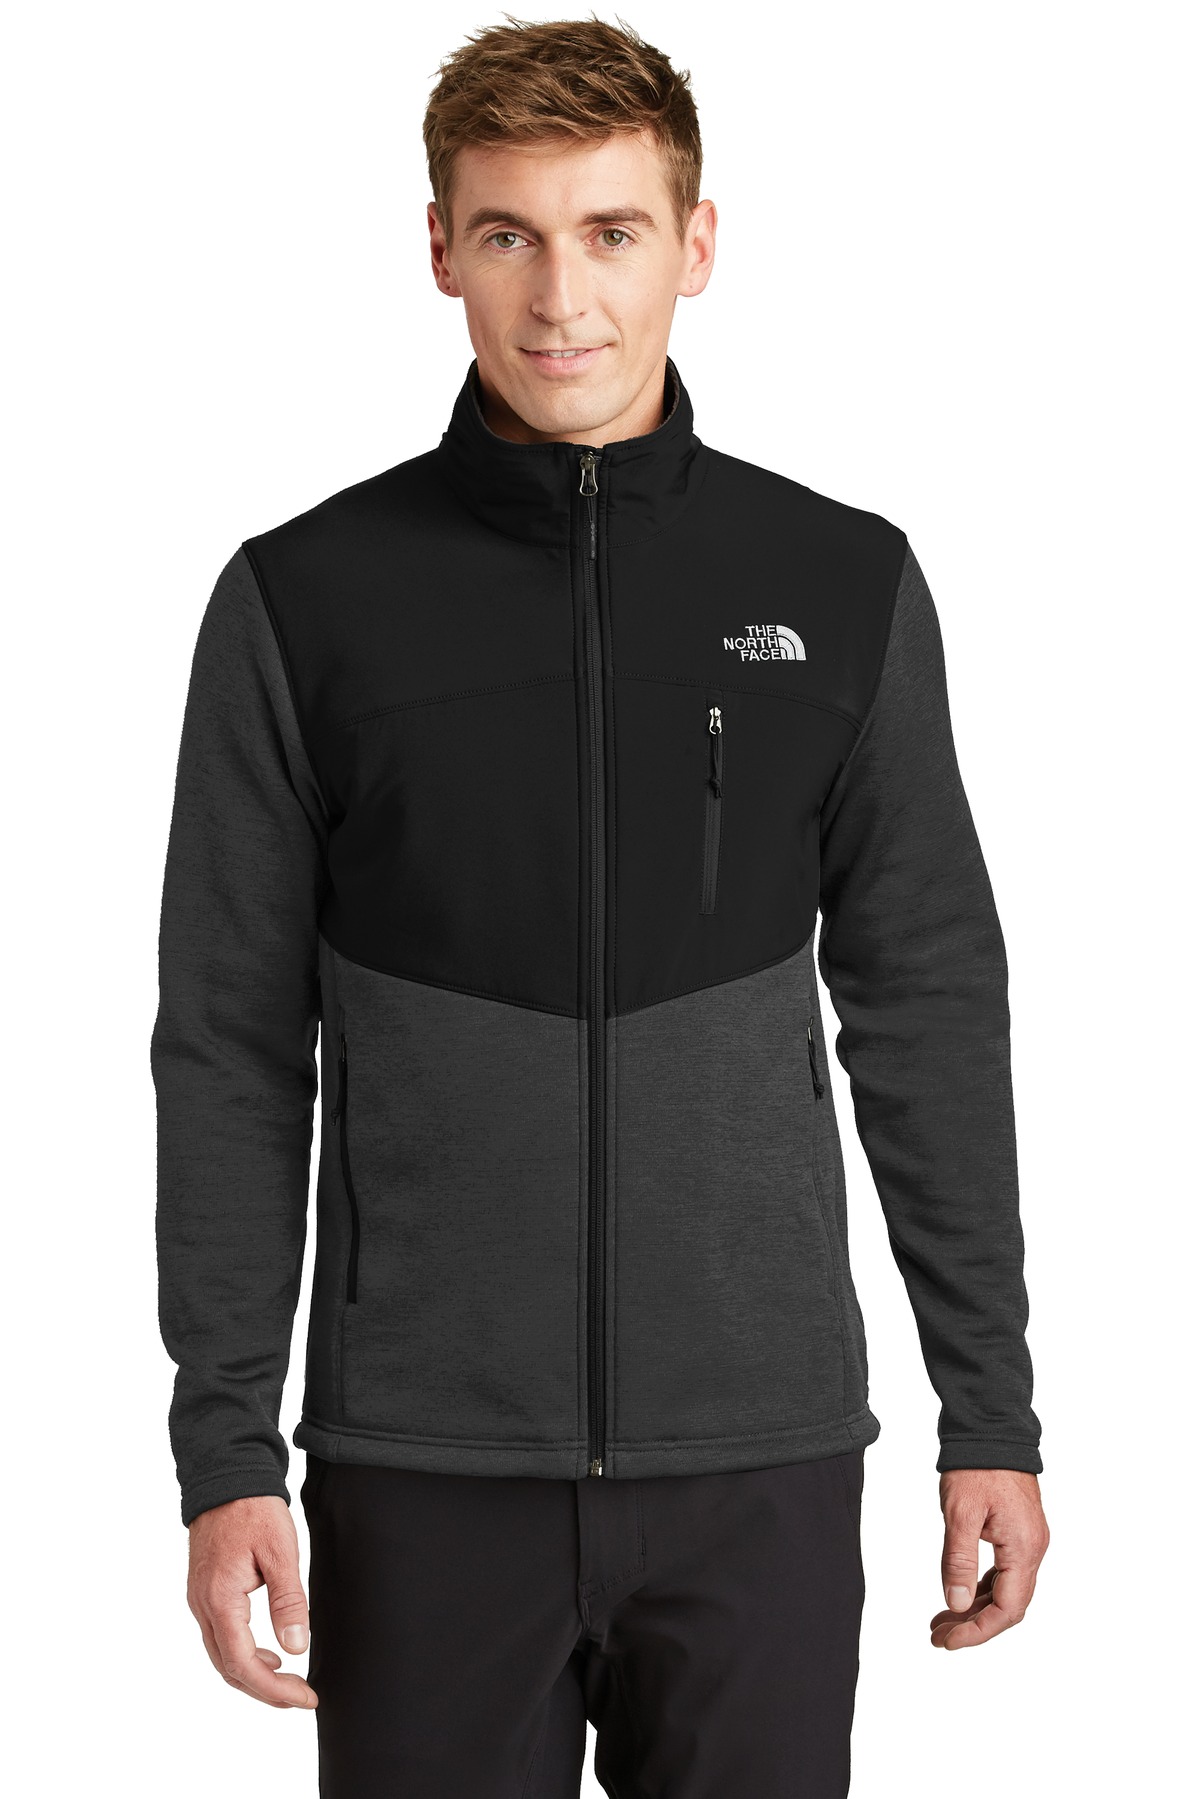 north face polyester jacket